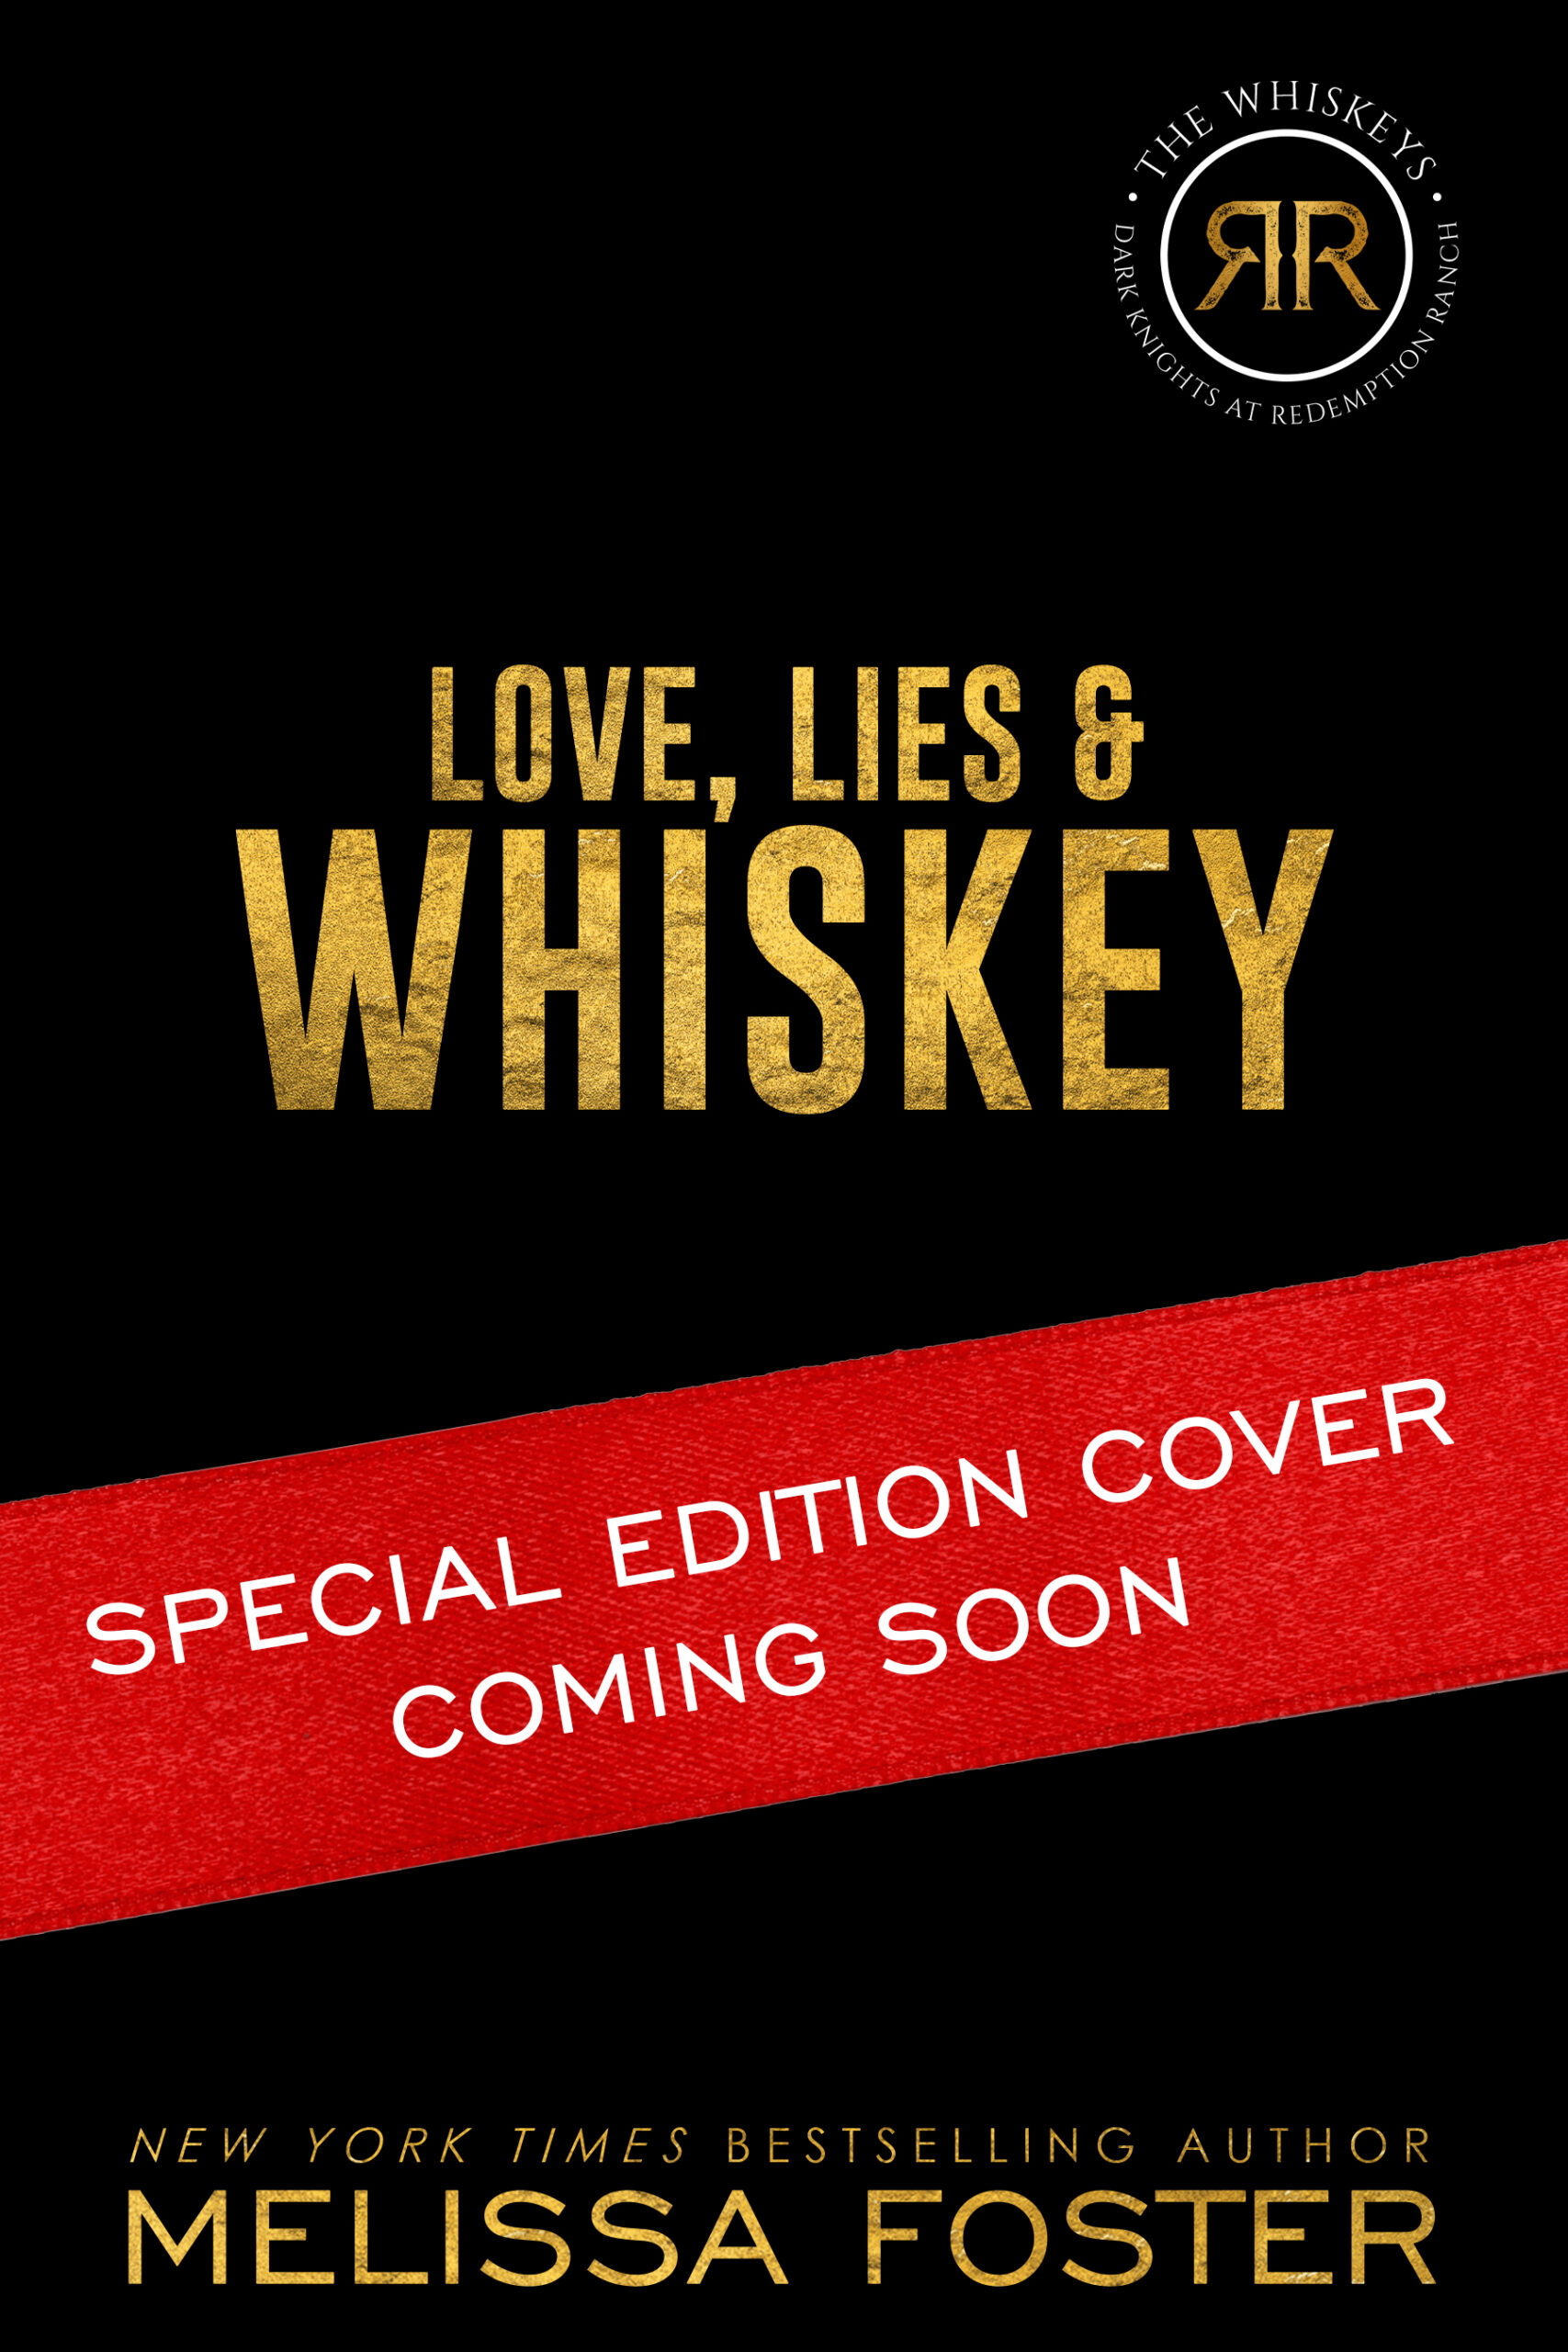 Love, Lies and Whiskey Special Edition by Melissa Foster